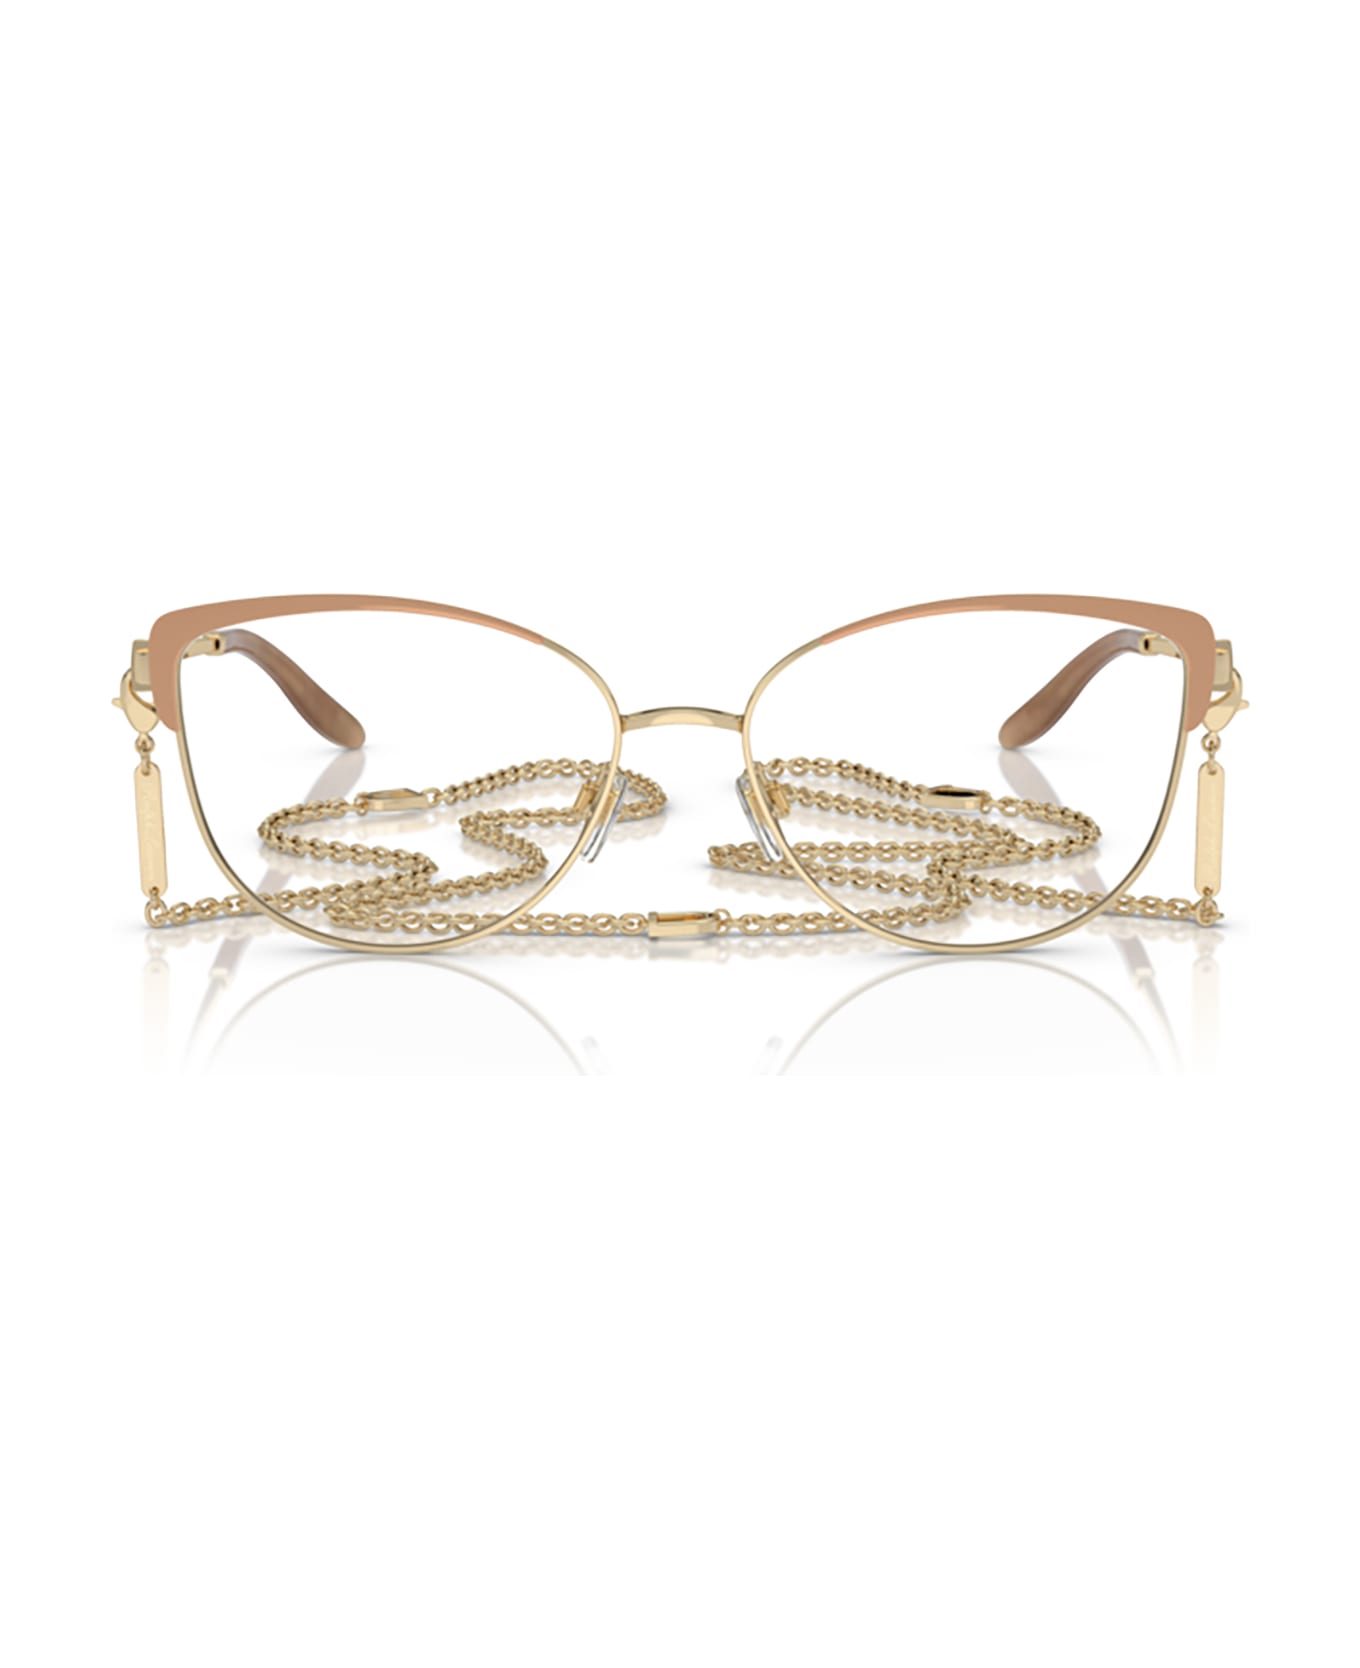 Ralph Lauren Rl5123 Nude / Pale Gold Glasses - Nude / Pale Gold アイウェア